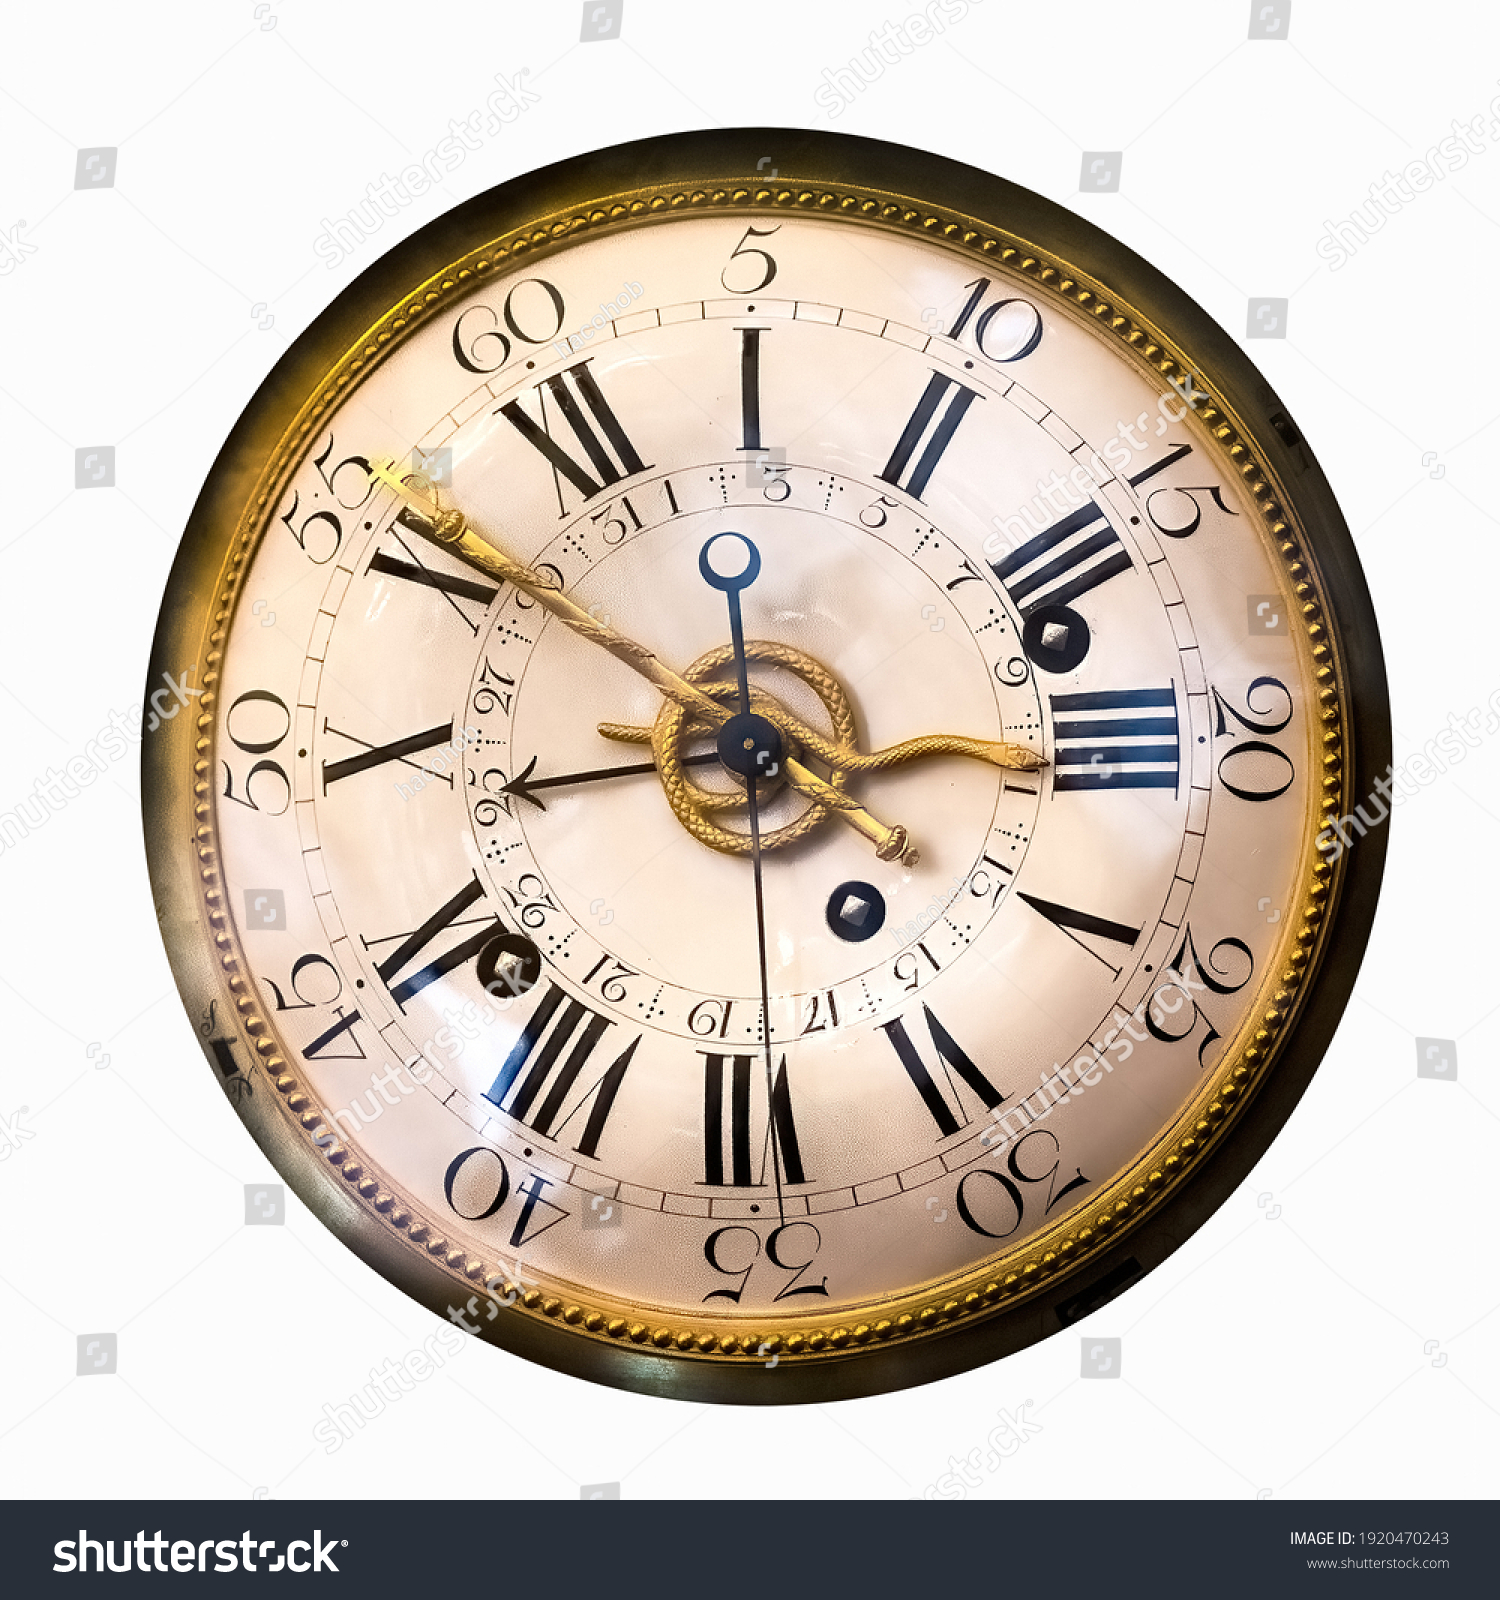 Antique clock face of the ancient watch. #1920470243